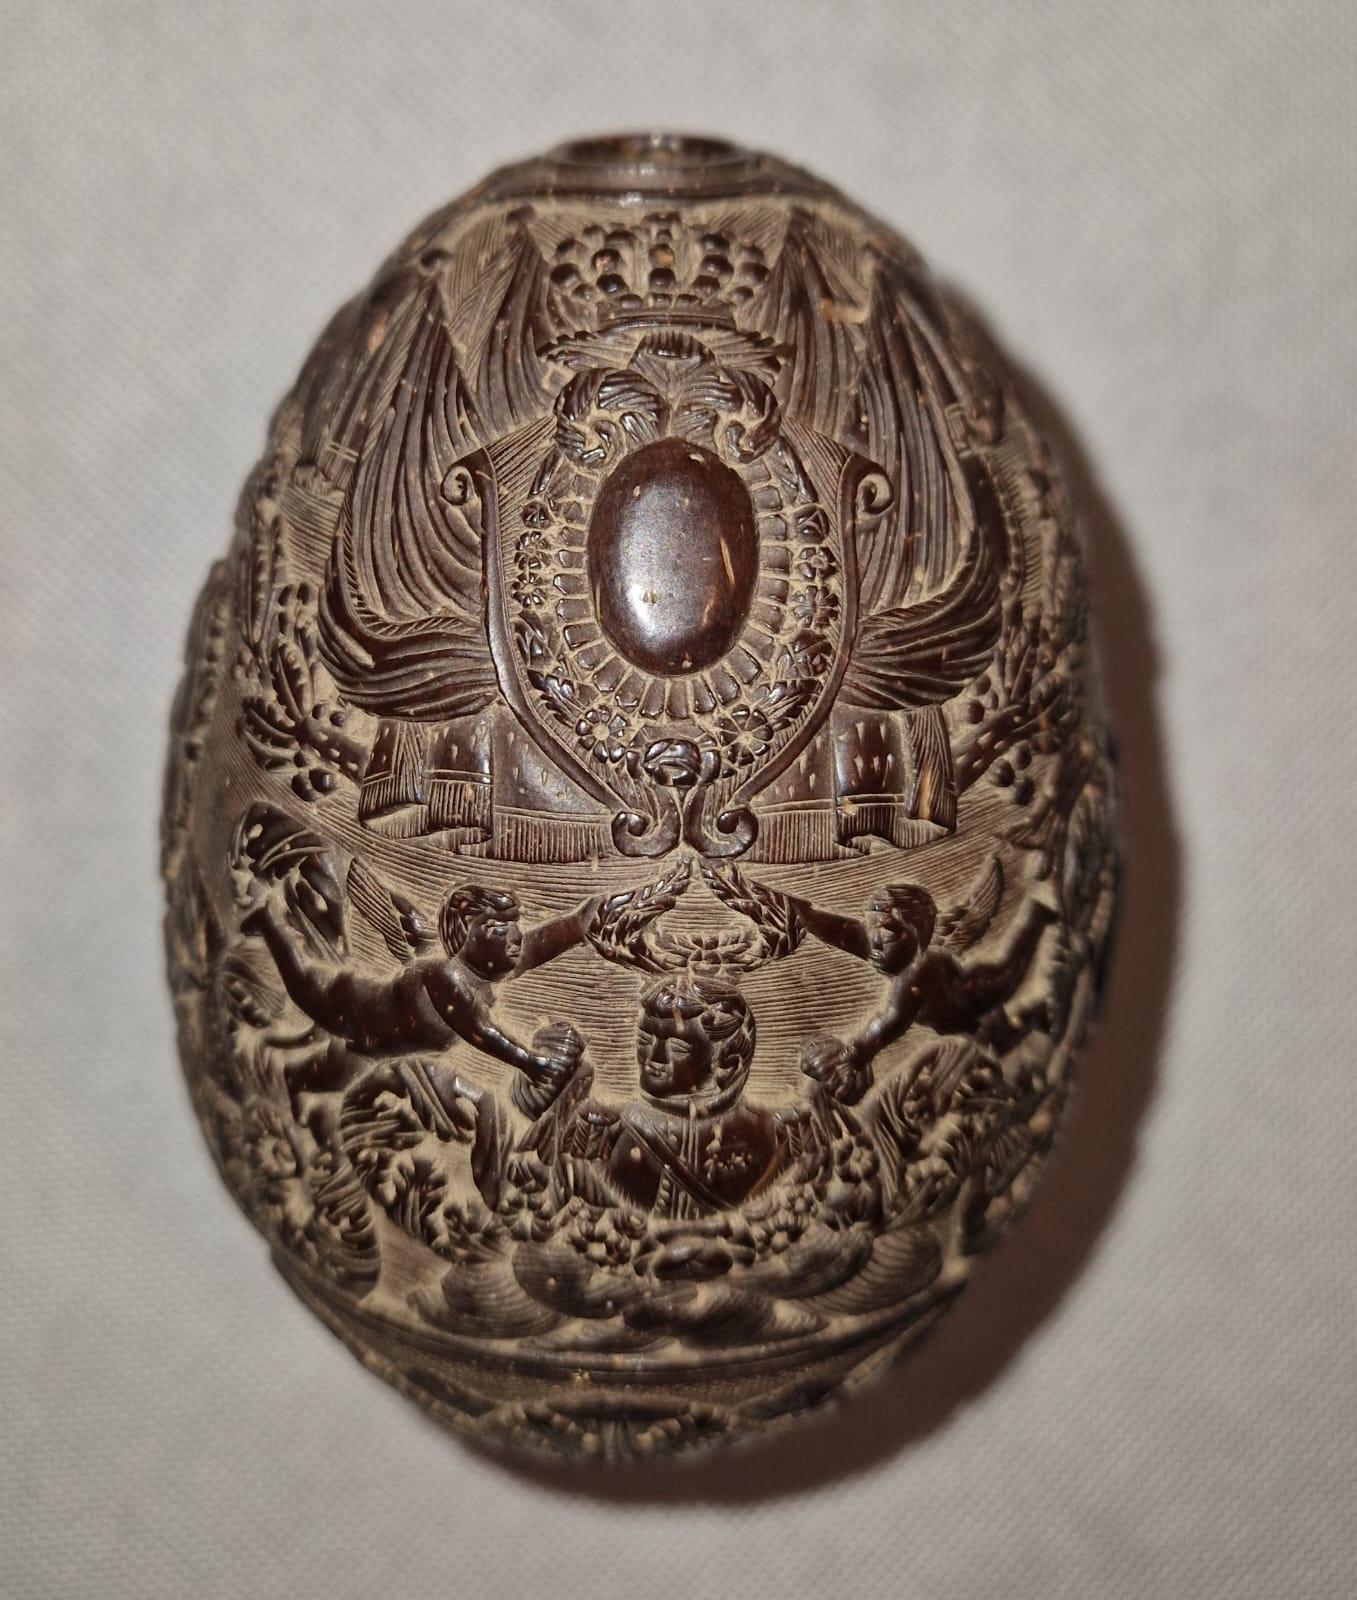 Very pretty, richly and finely carved coconut dating from the Empire period. With rotating decoration, it partly represents an admiral surrounded by two cupids holding the laurels of Victory topped with a shield adorned with flags probably those of